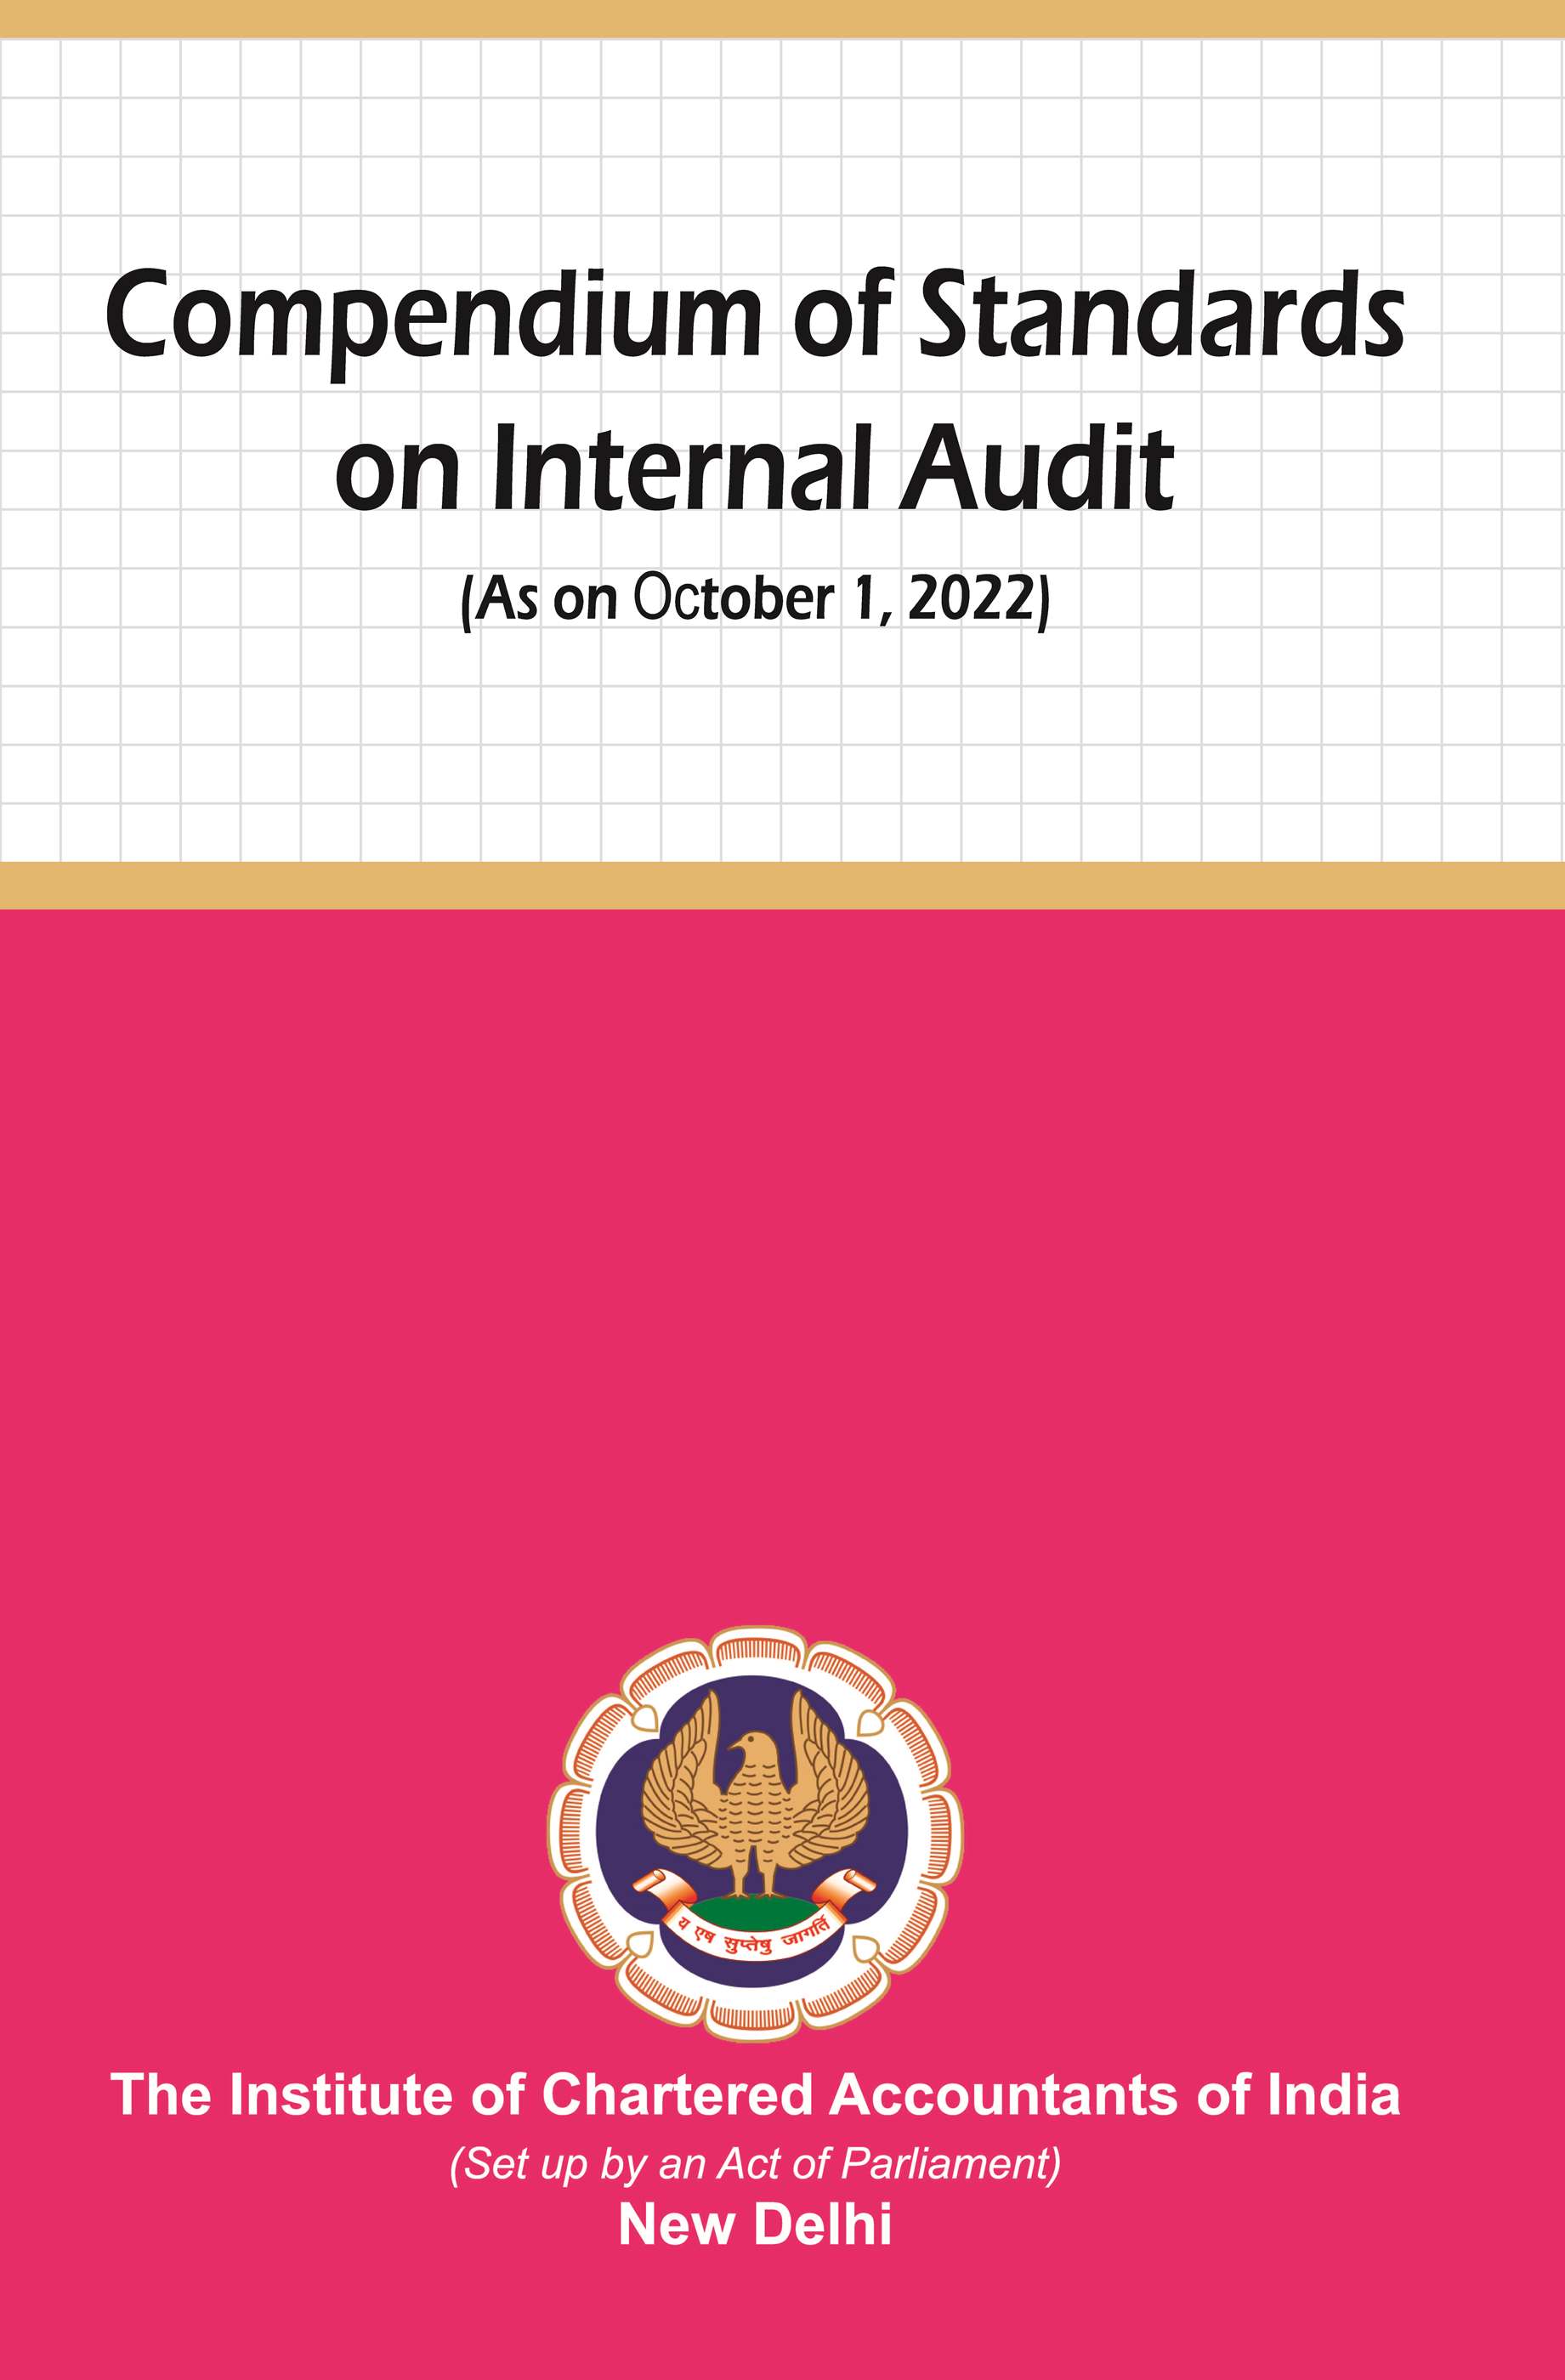 Compendium of Standards on Internal Audit (As on October 1, 2022)